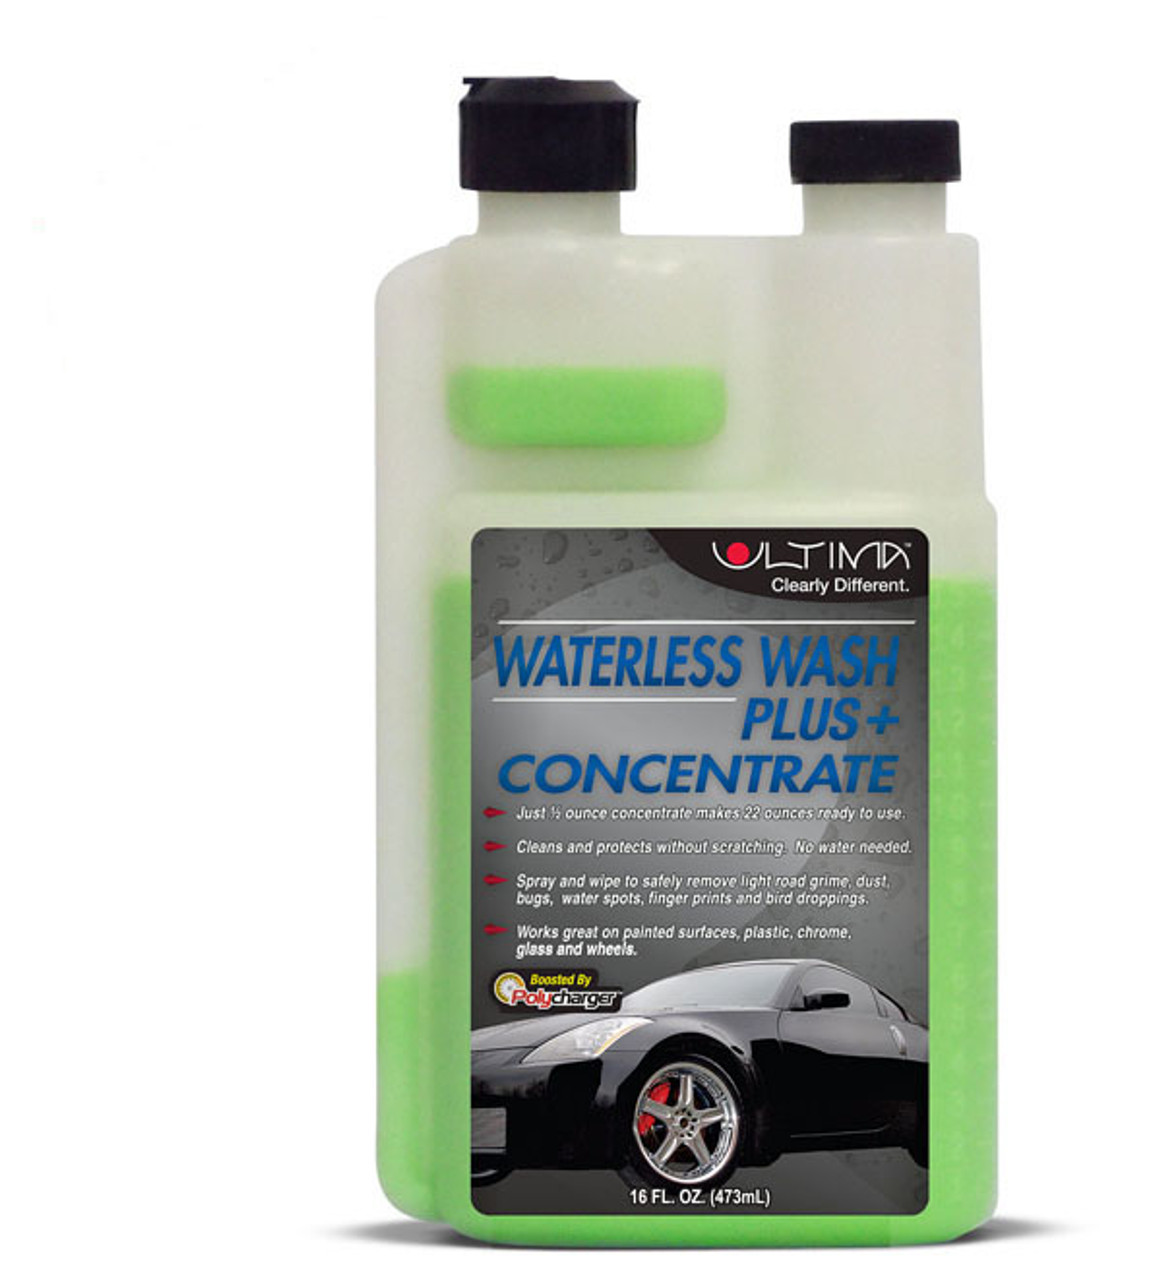 Waterless Wash has changed it's color - Product Polls, Feedback